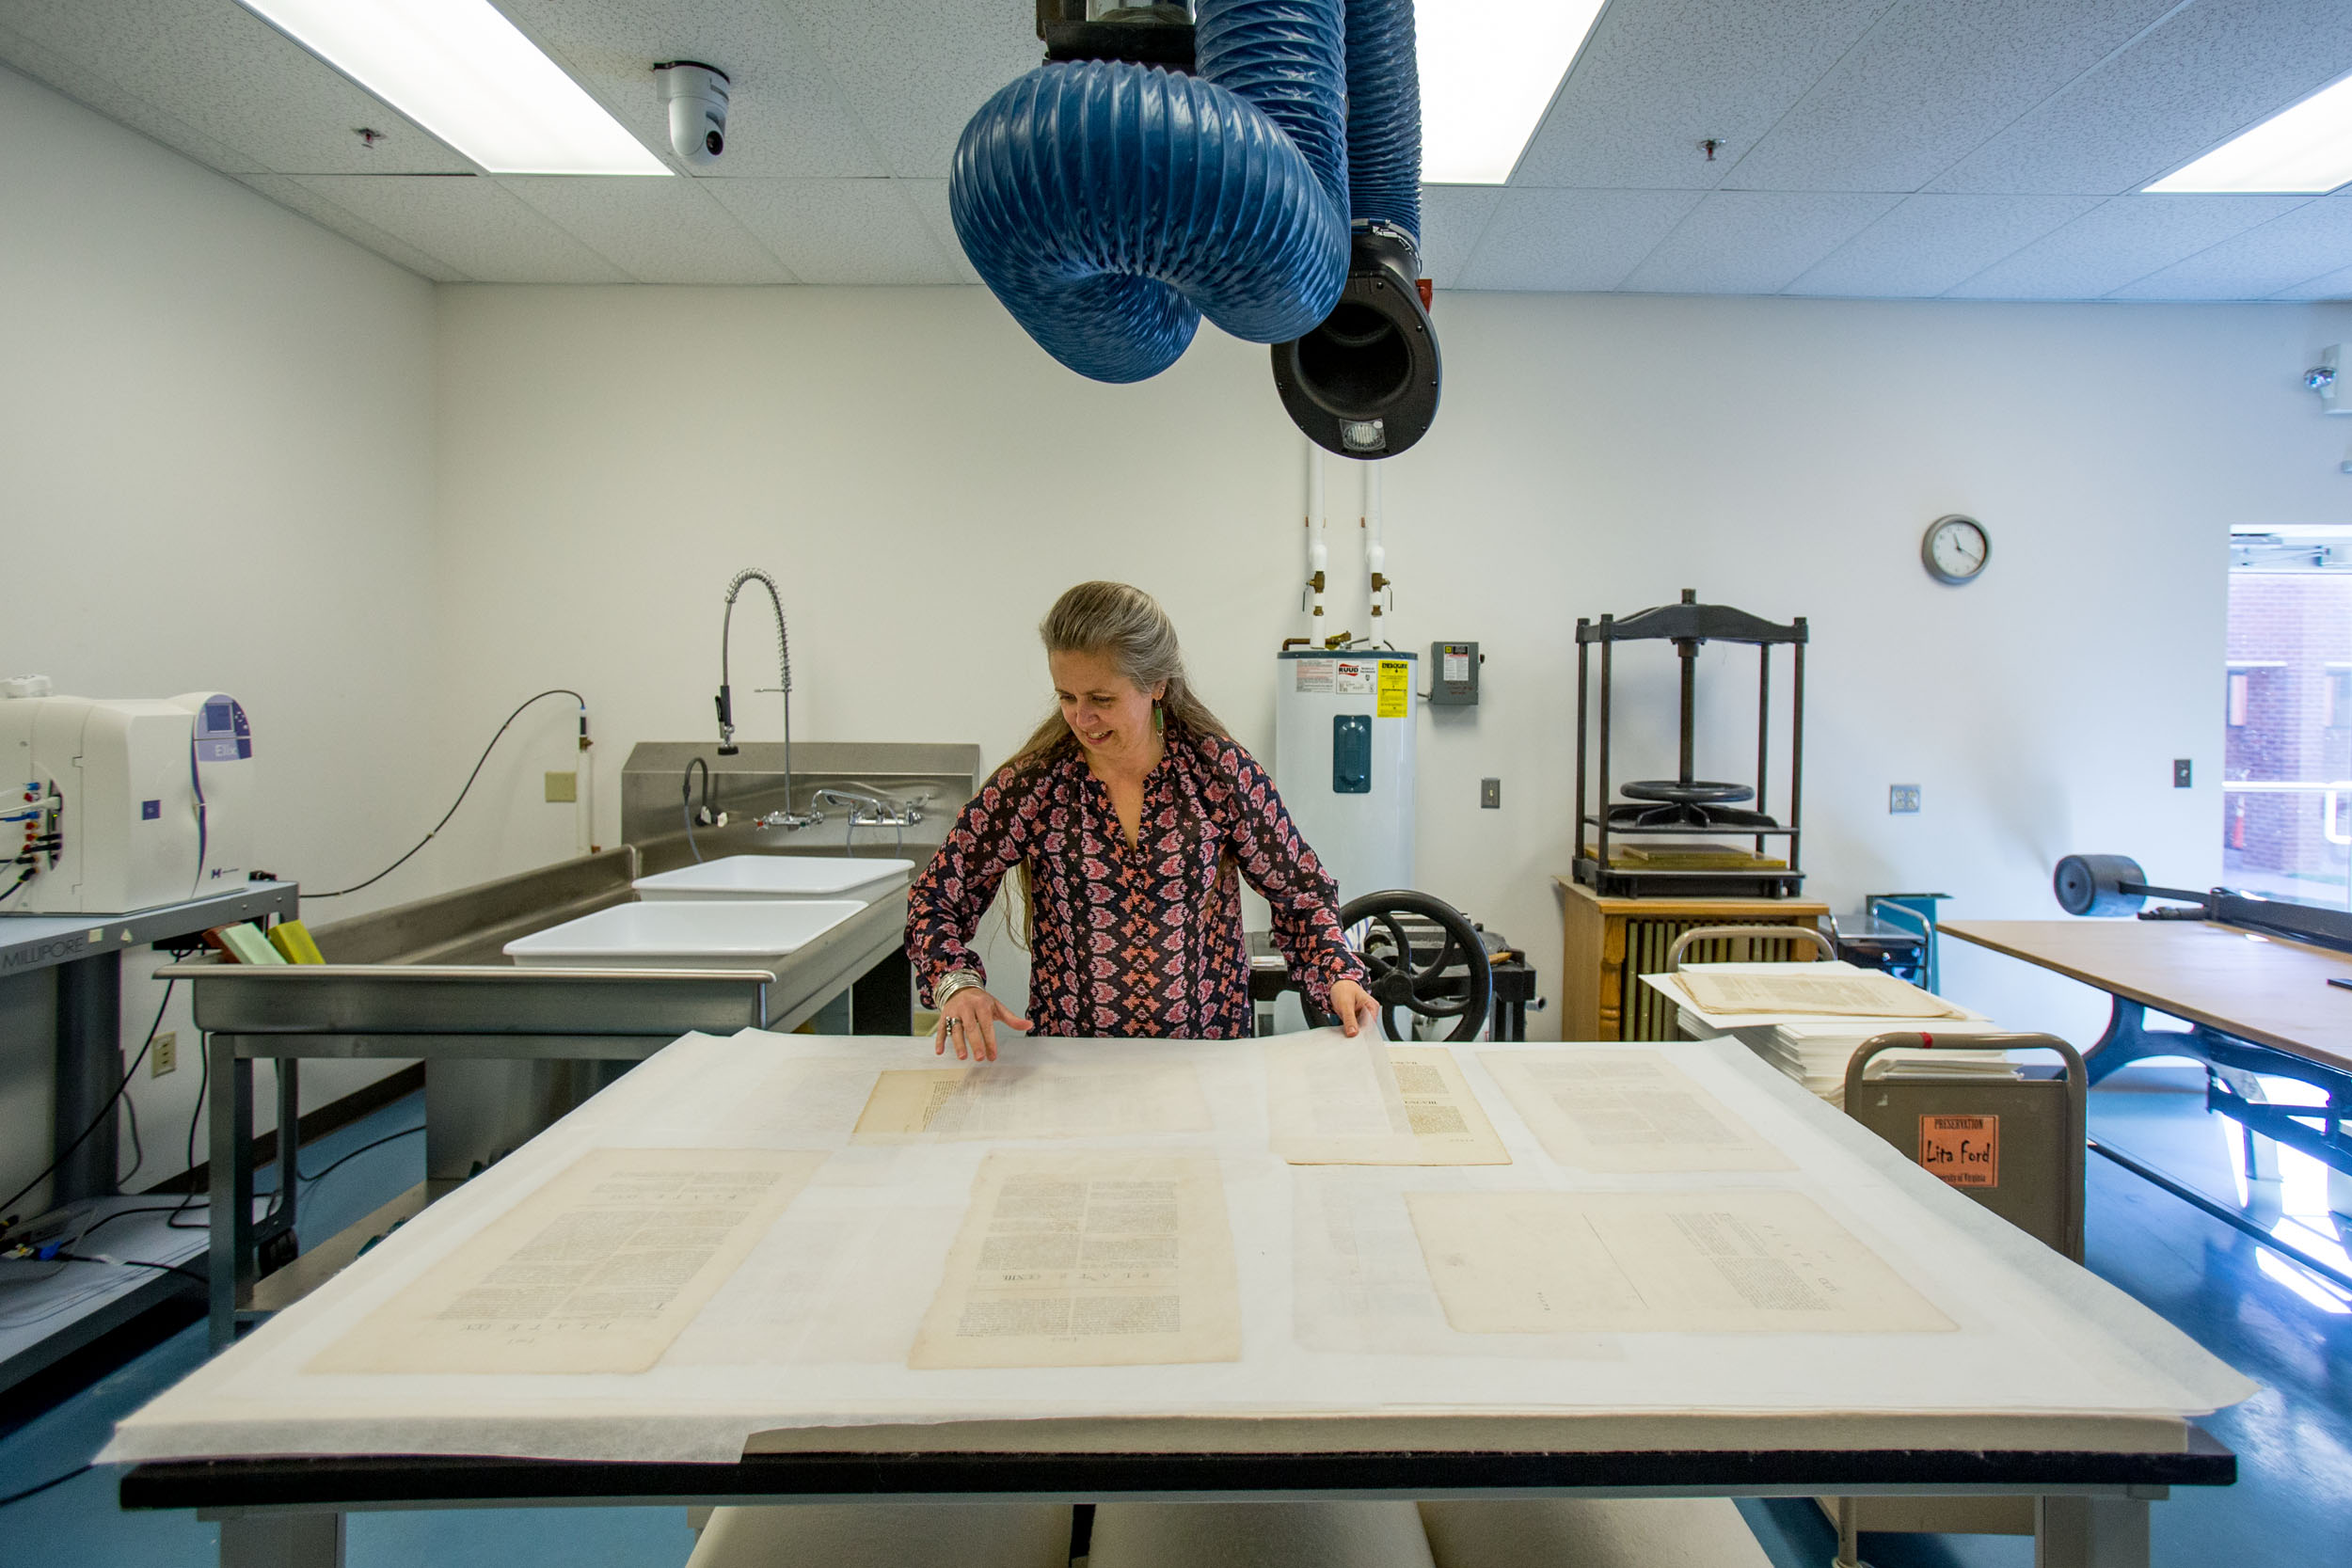 Gilligan lays out newly cleaned pages of Carter’s original volume. Photos by Sanjay Suchak / University Communications